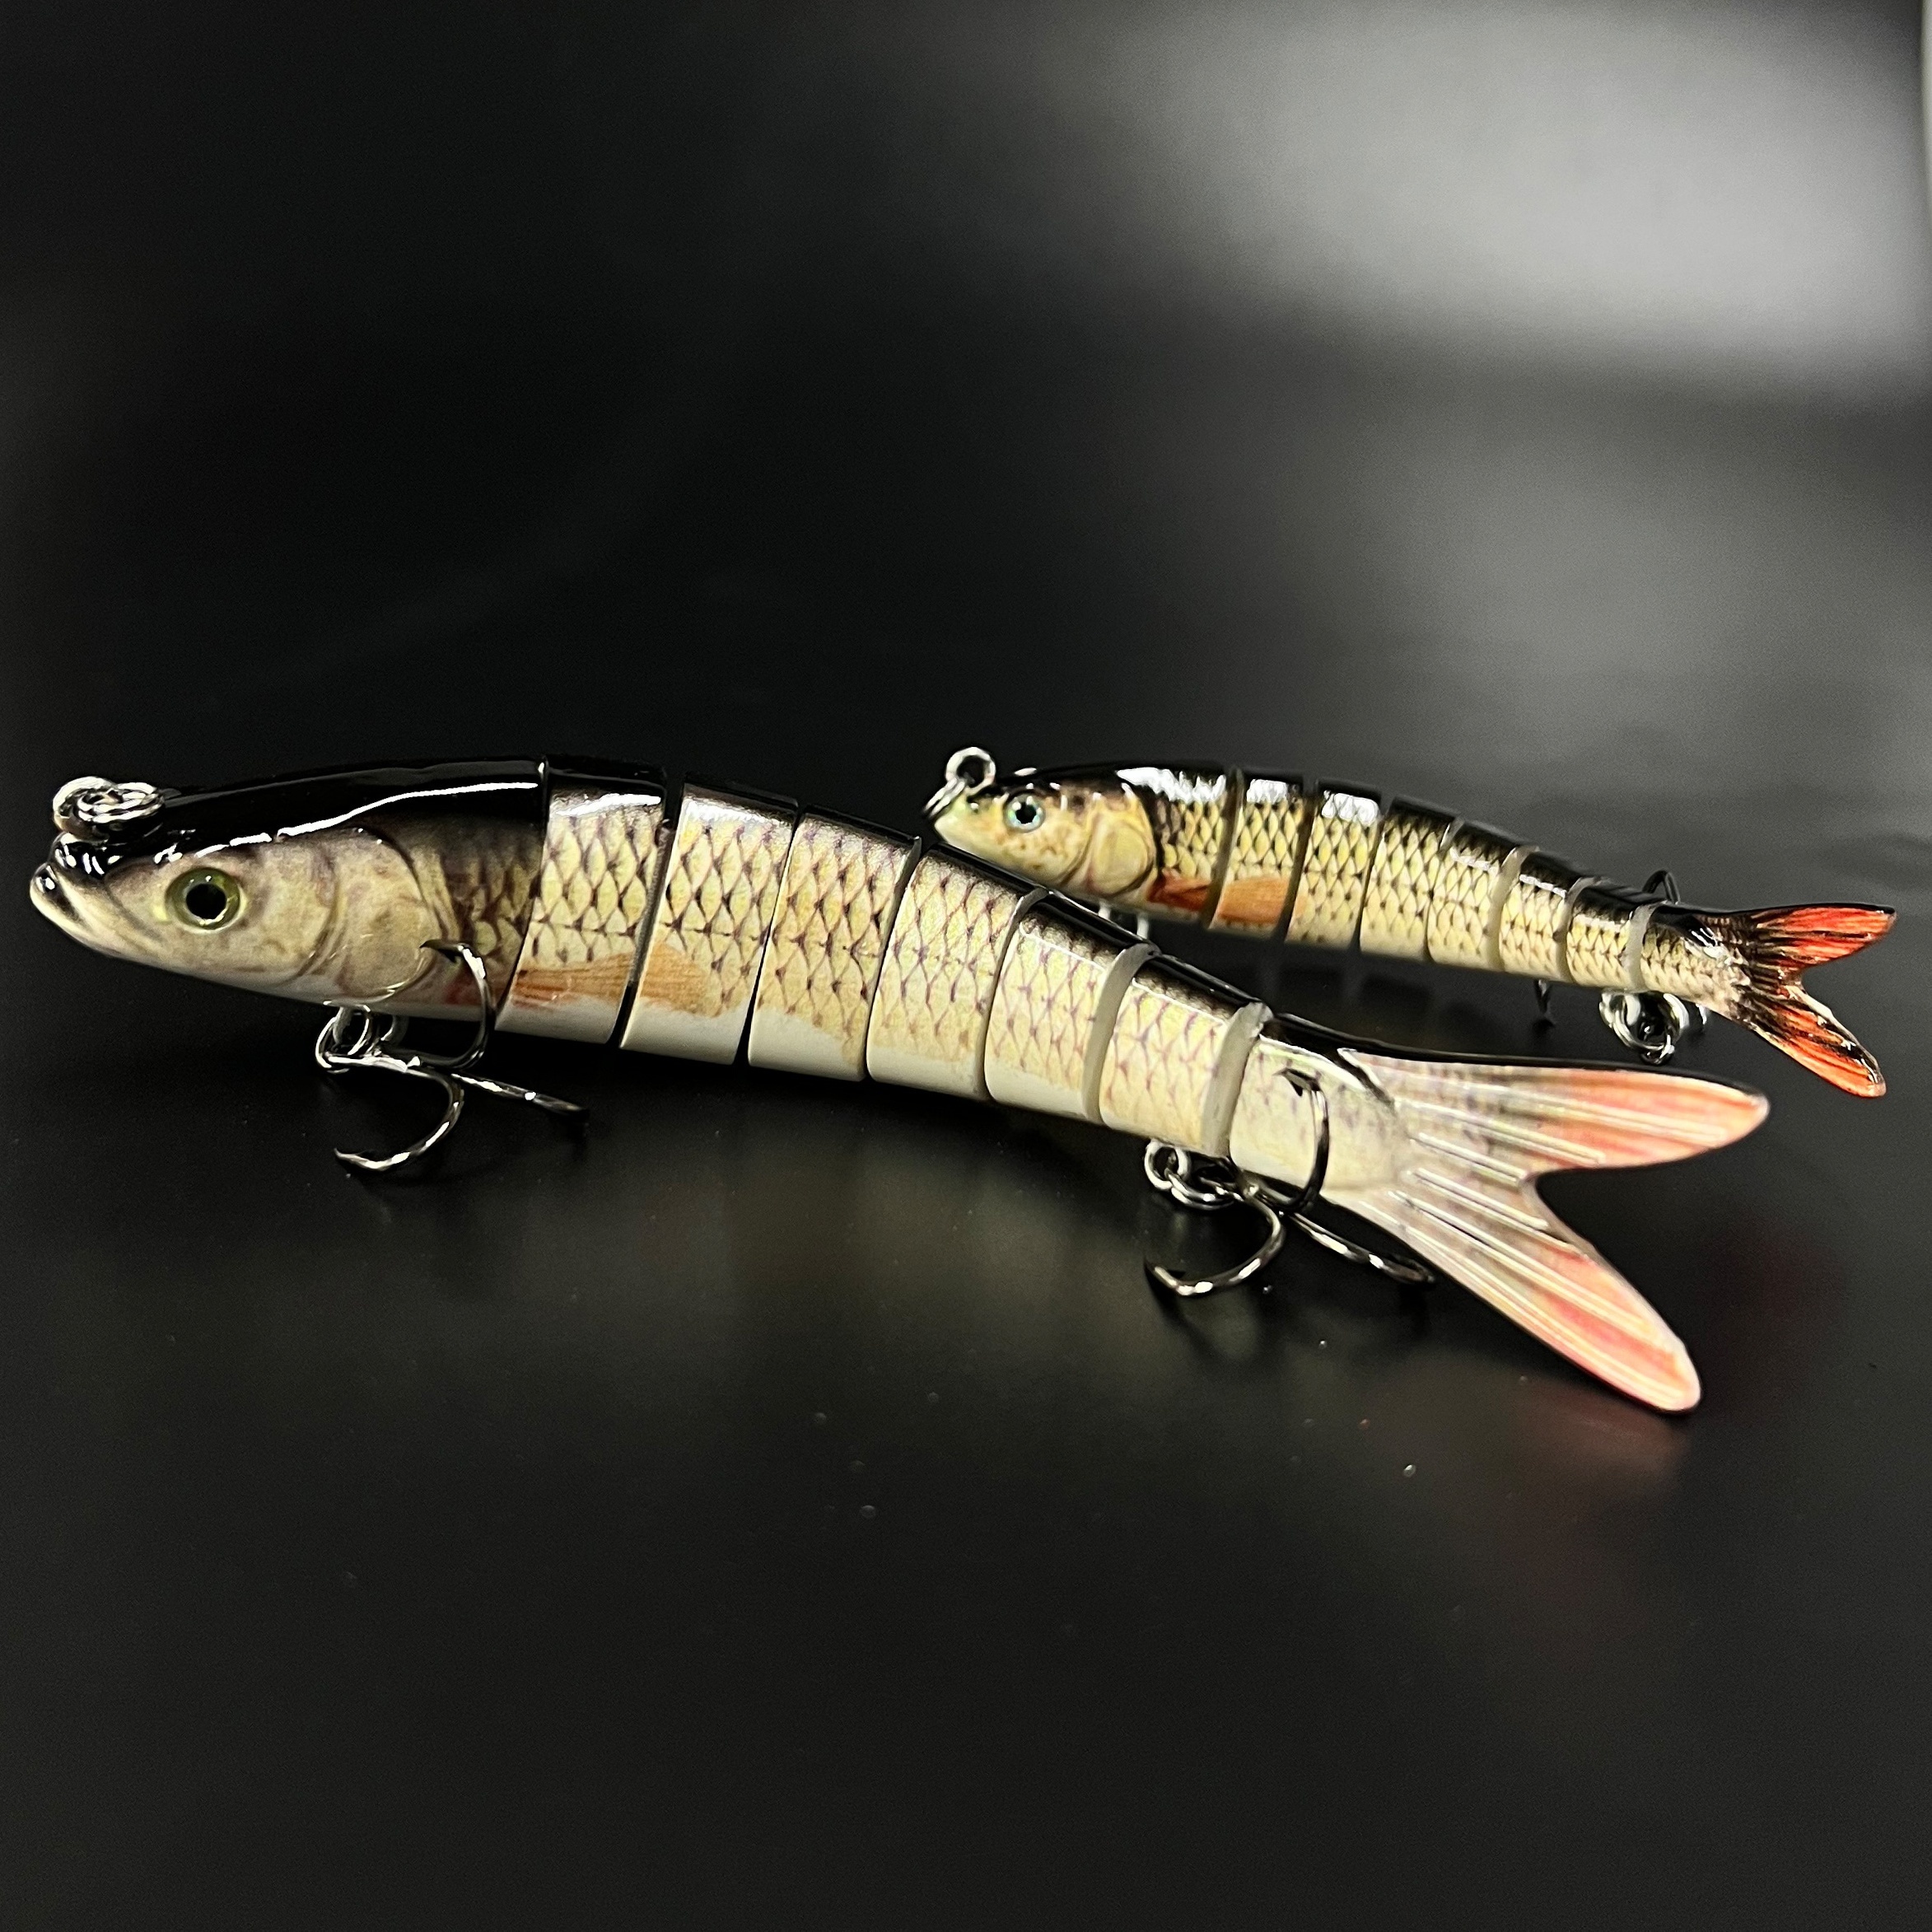 0.39oz 0.92oz Two Size Lifelike Fishing Lures For Bass, Trout, Walleye,  Predator Fish - Realistic Multi Jointed Fish Popper Swimbaits -  Spinnerbaits L